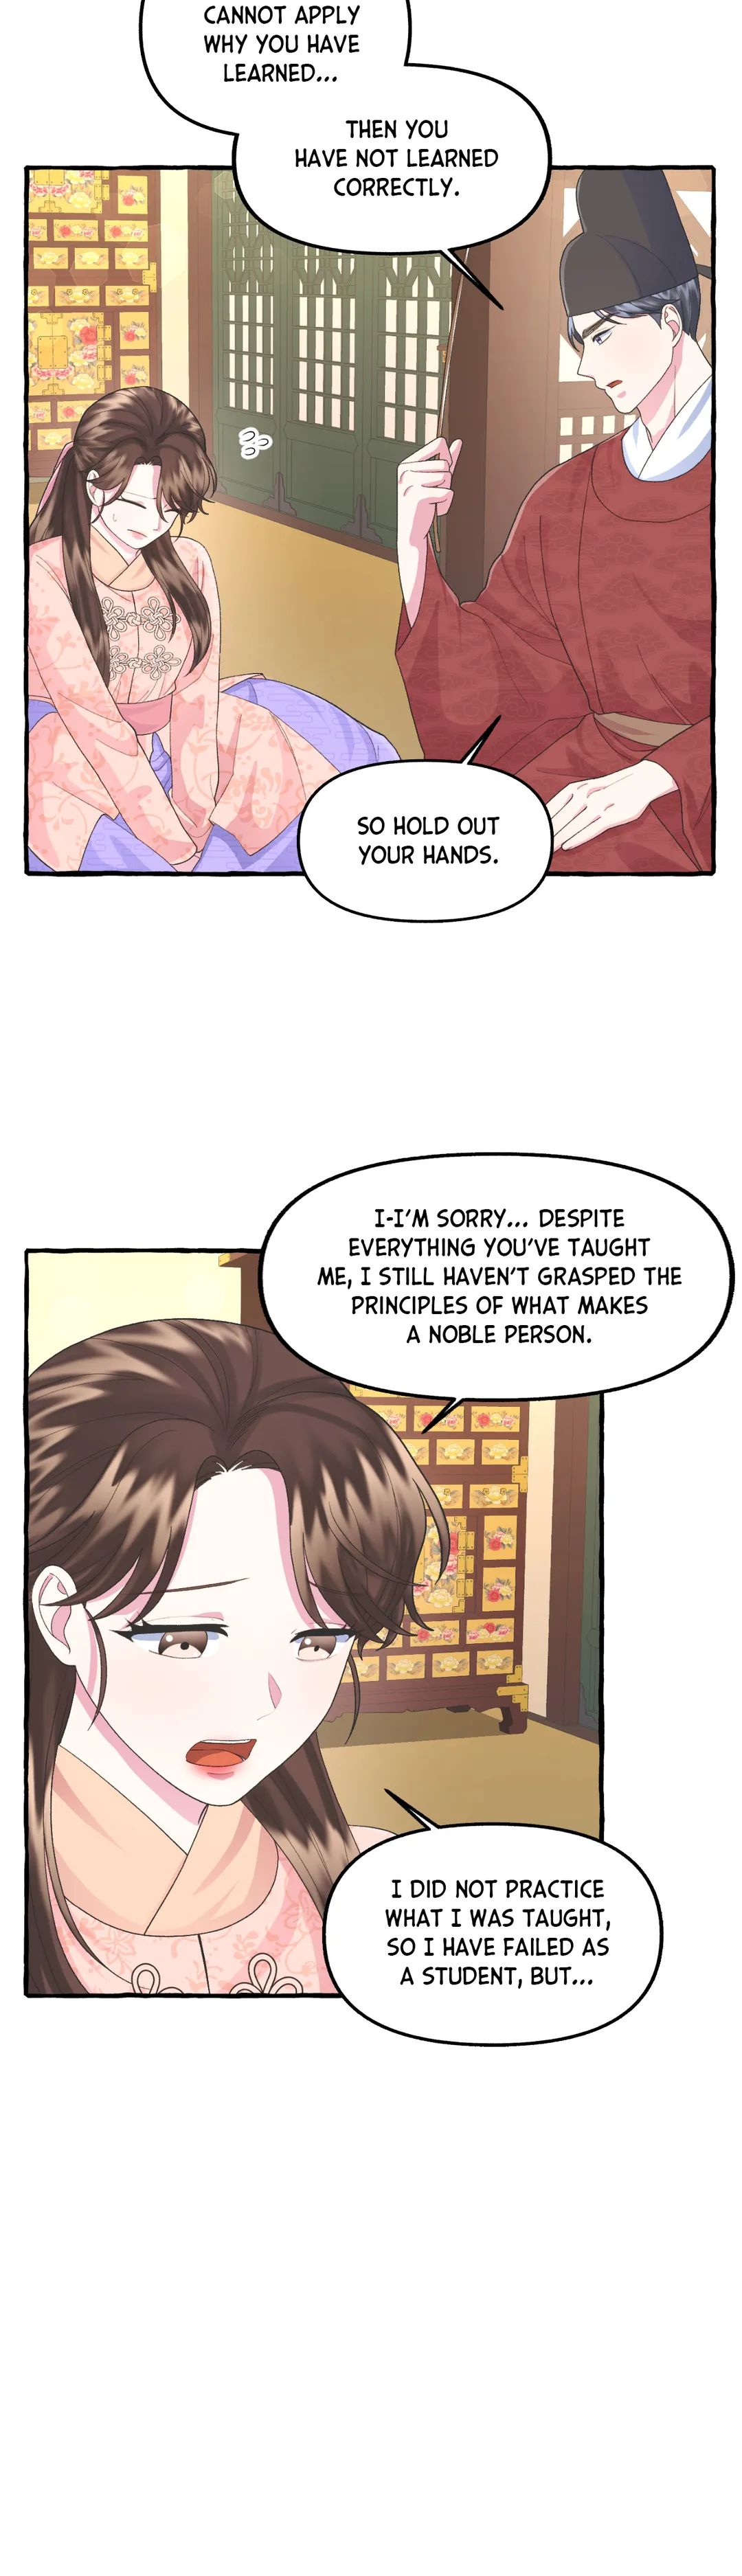 Cheer Up, Your Highness! chapter 15